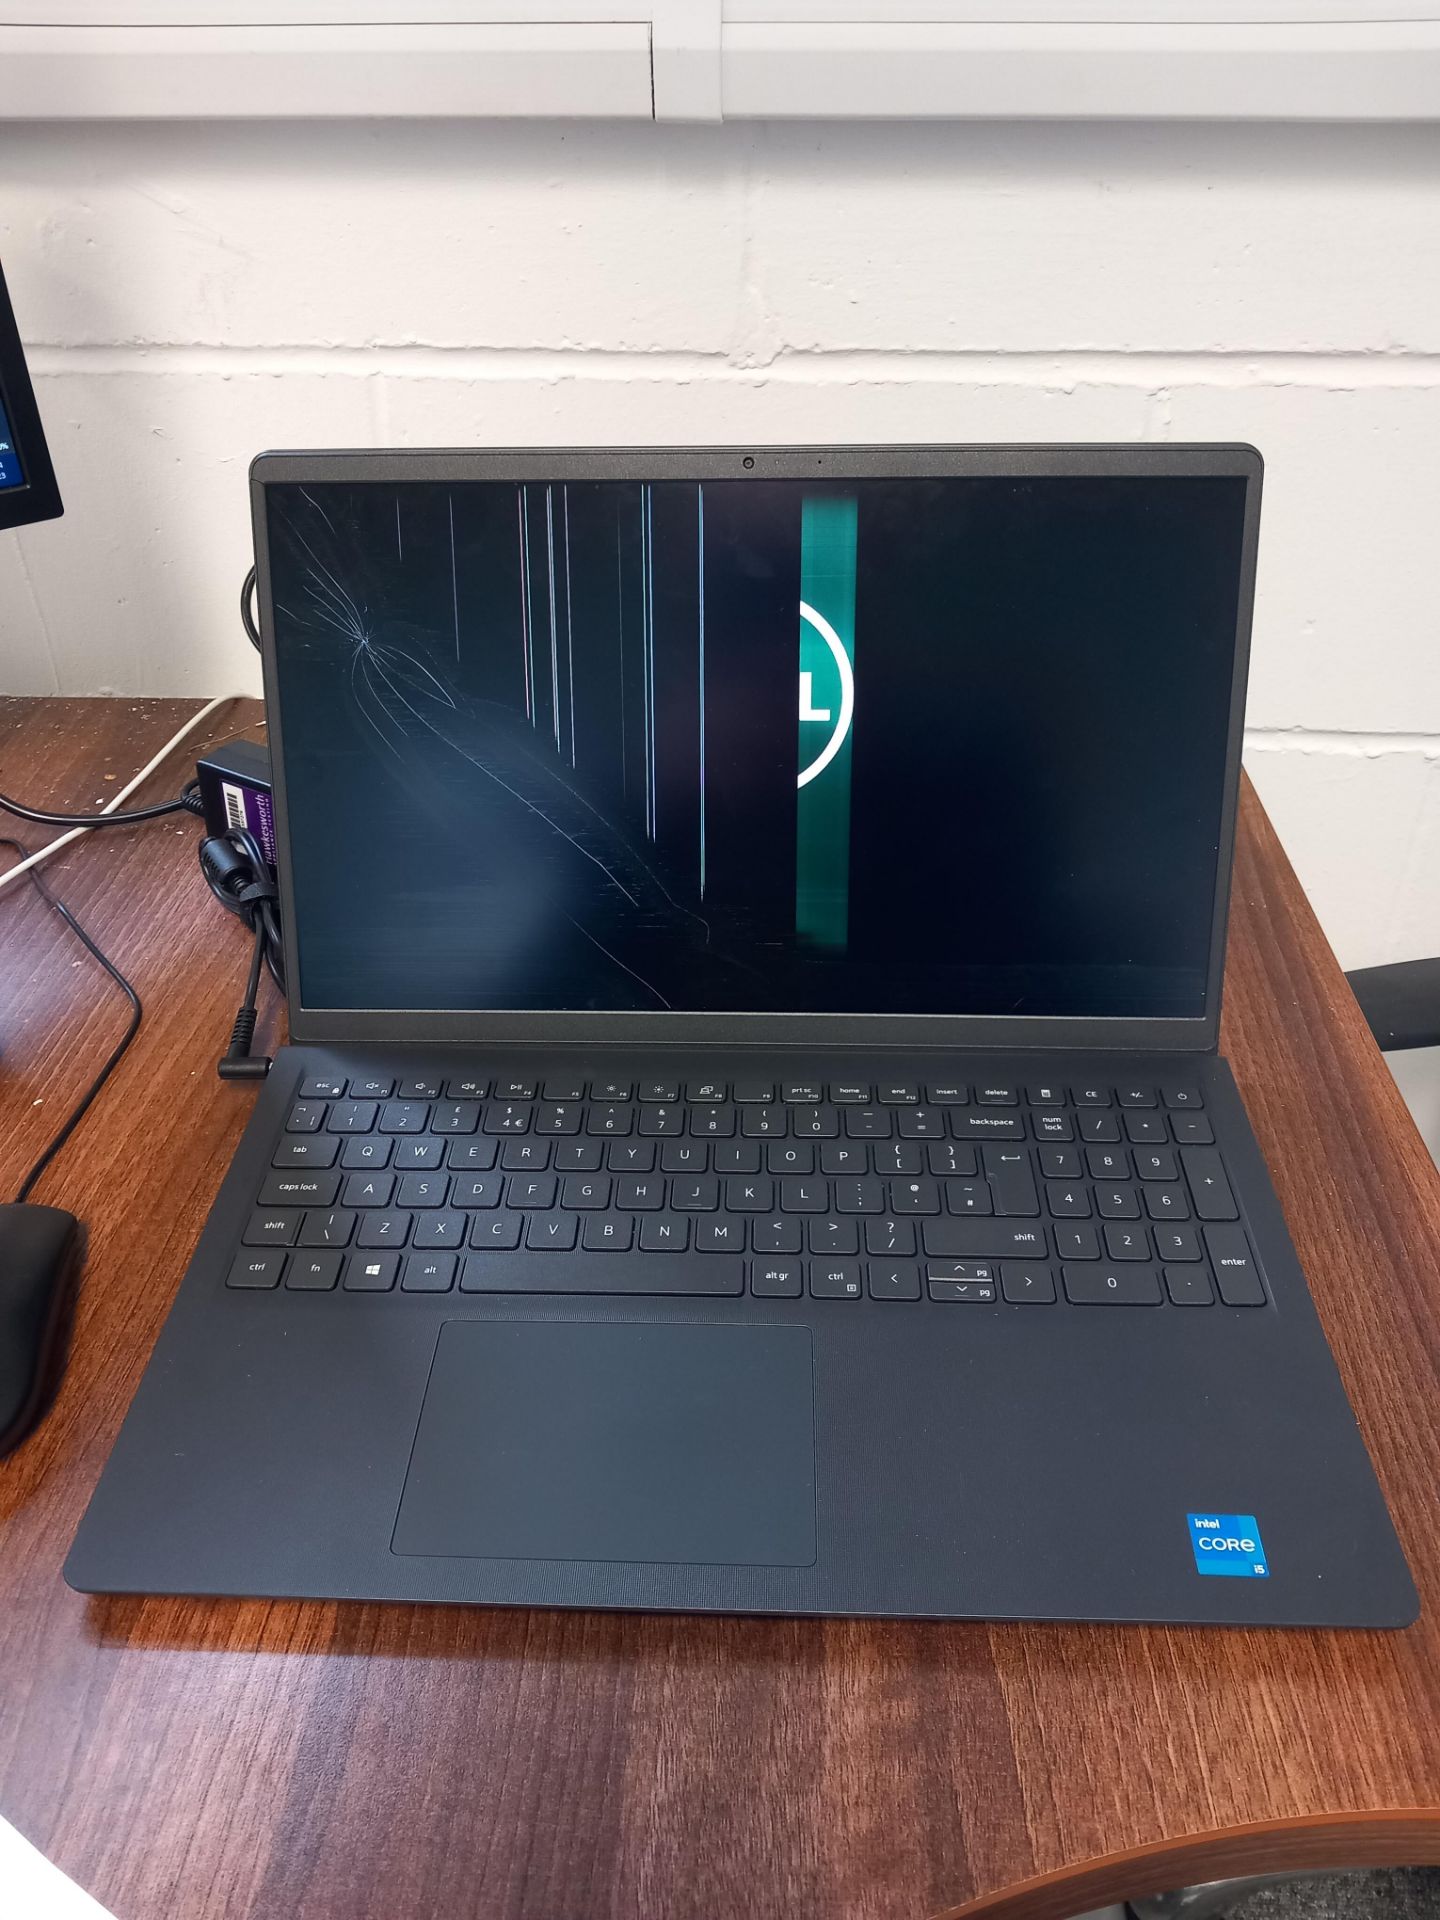 Dell Vostro 153510 Intel Core i5 Laptop with Charger. Located in Stockport. (Damaged Screen as - Image 4 of 4